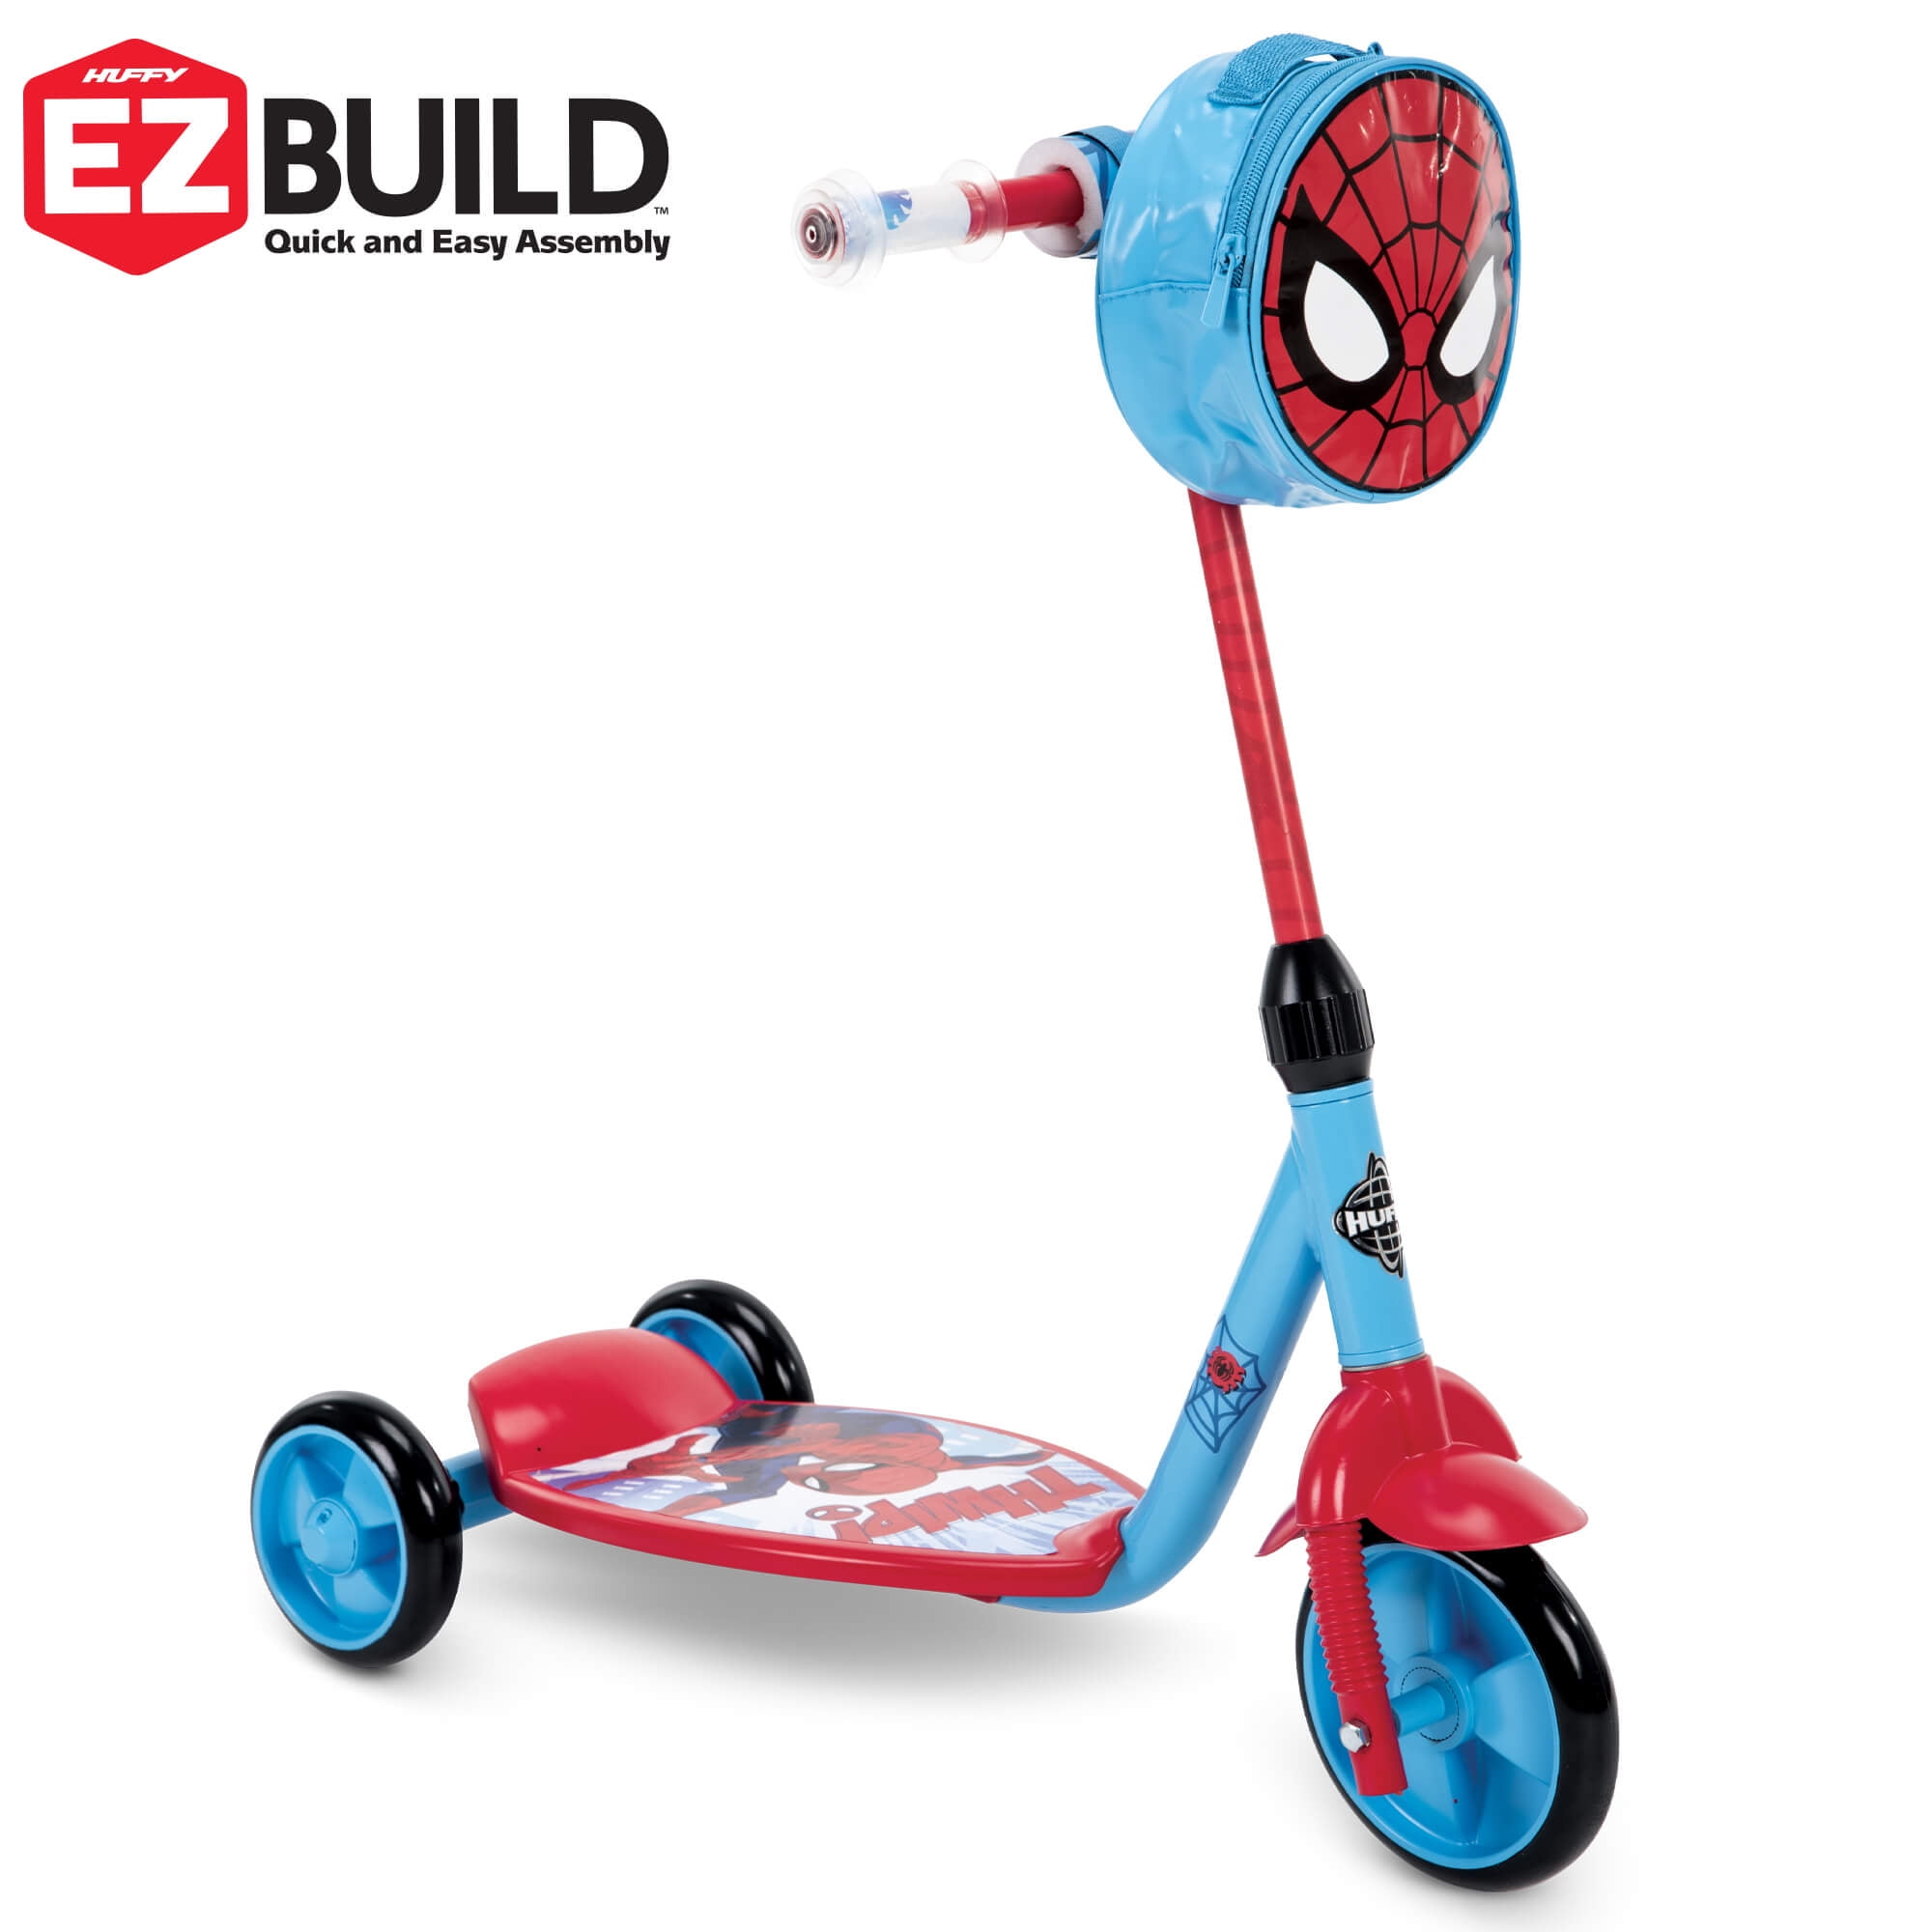 tri scooter for 2 year old